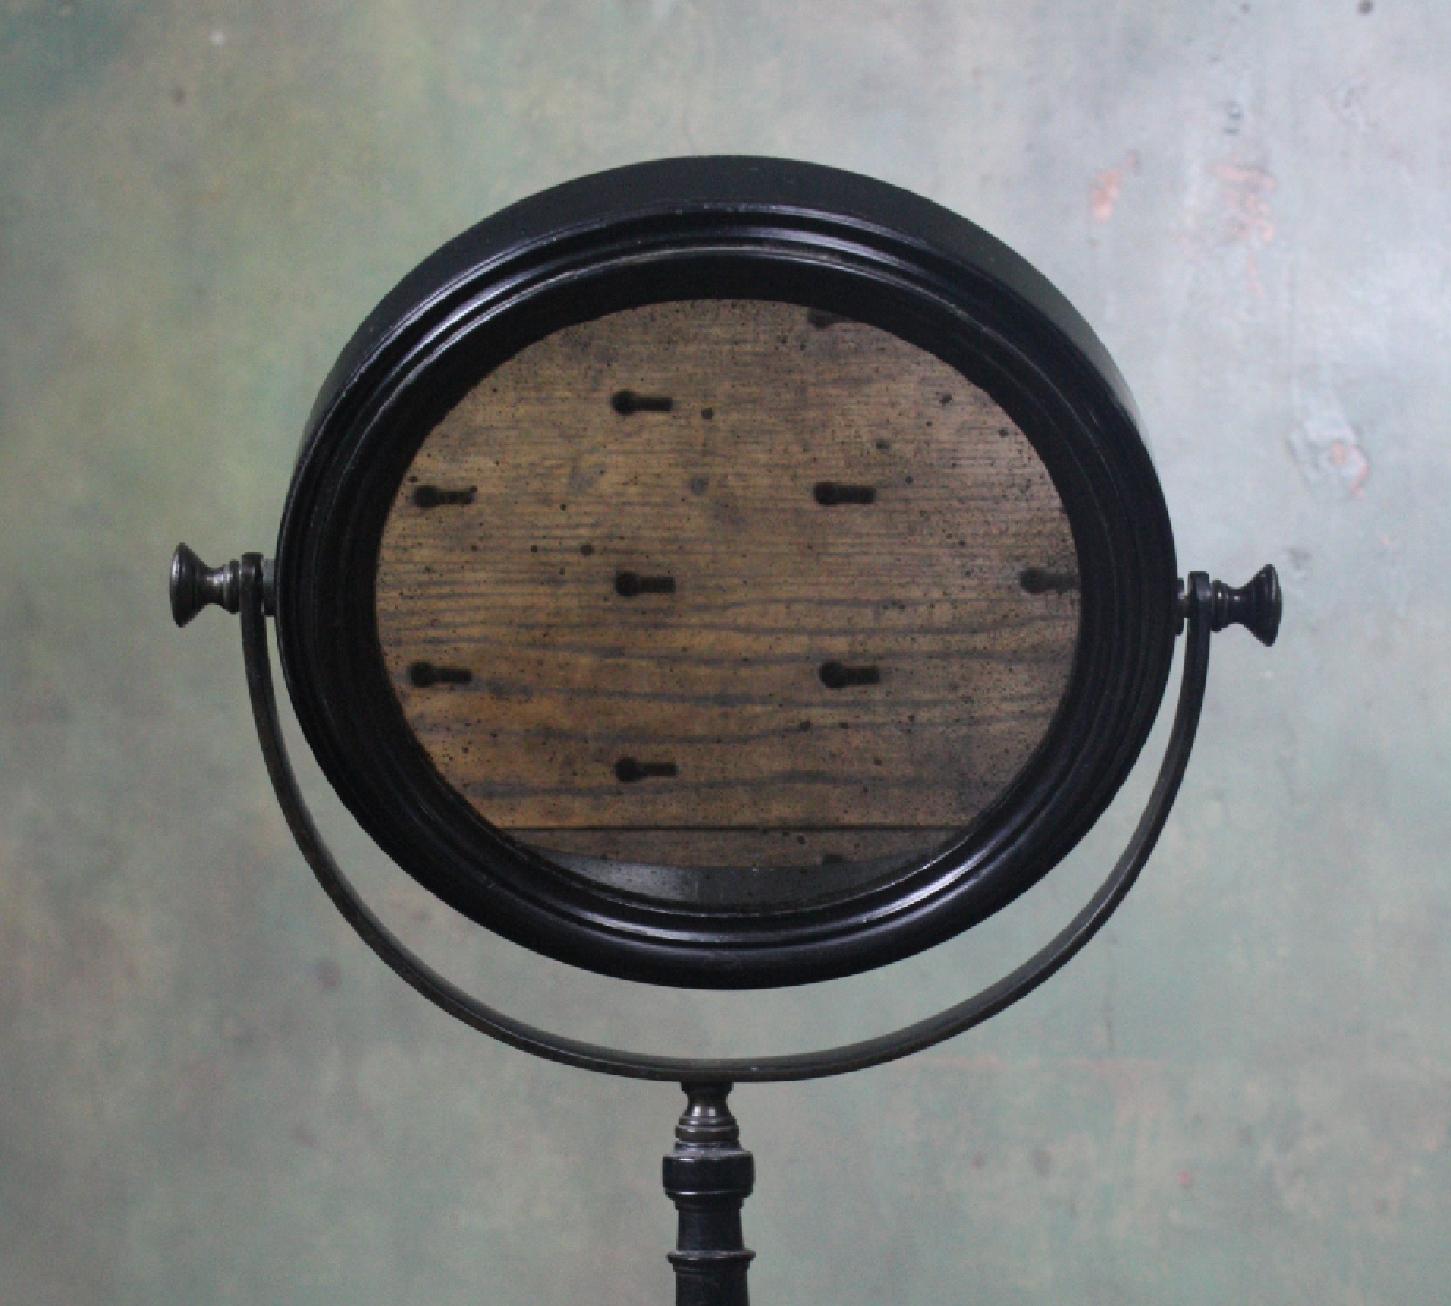 A scientific optical doubled sided mirror with one concave mirror plate the other flat 

These where used in studies of optical sciences and in particular the study of the properties of light rays,

circa 1880s in age, English in origin